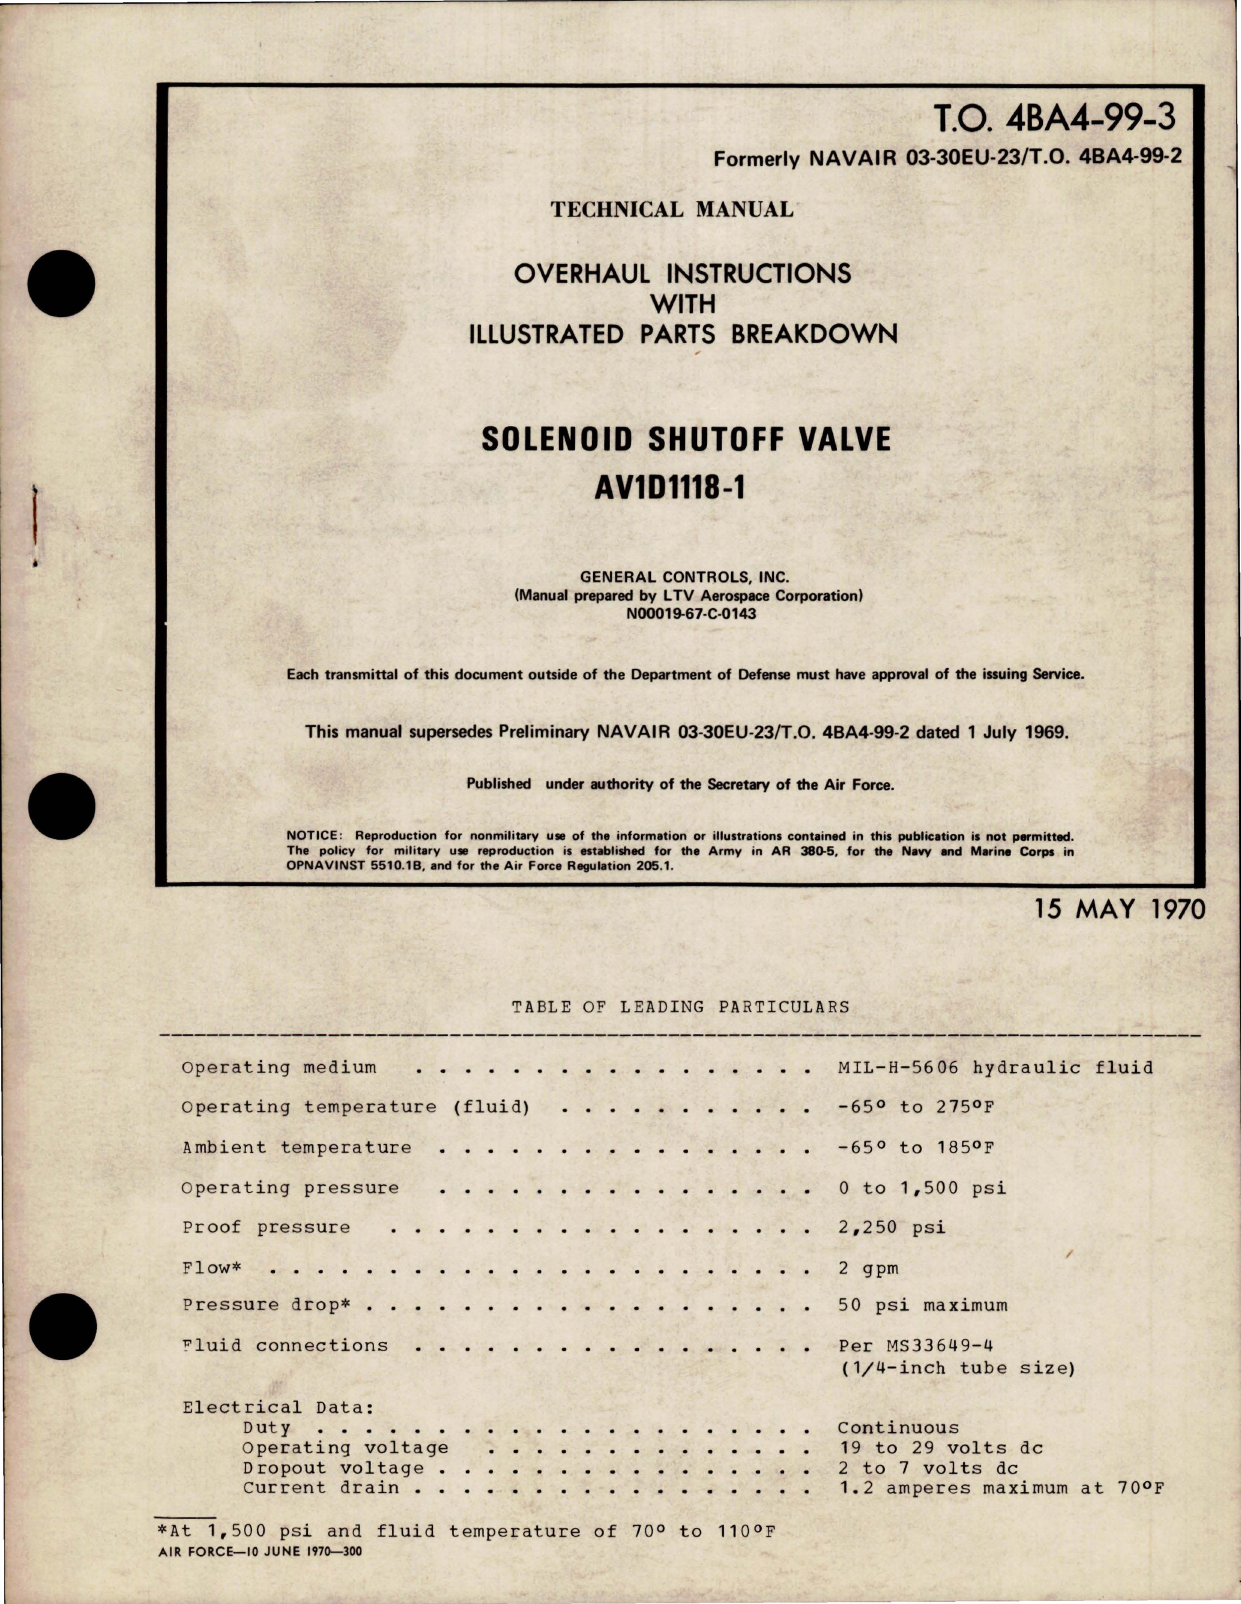 Sample page 1 from AirCorps Library document: Overhaul Instructions with Parts for Solenoid Shutoff Valve - AV1D1118-1 